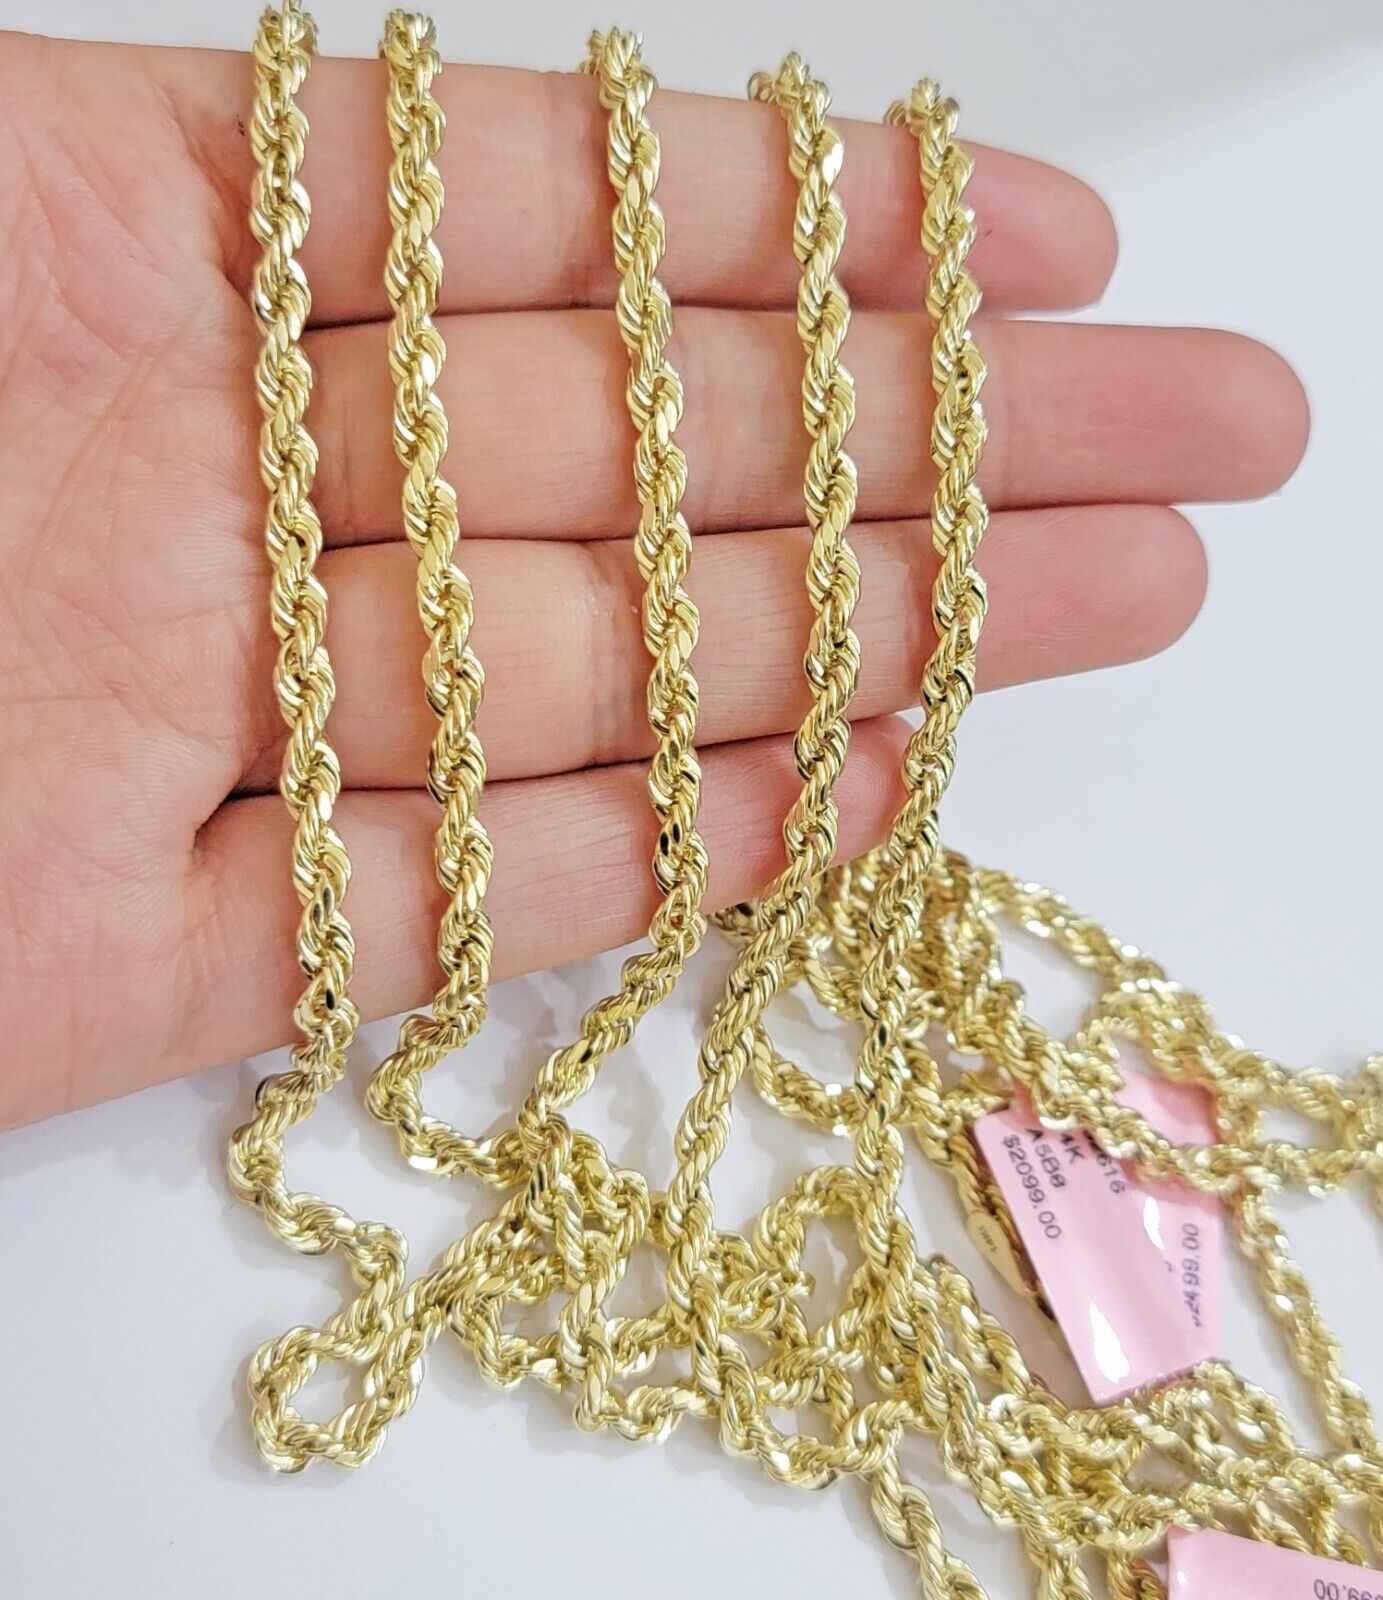 Real 14k Gold Rope Chain Necklace 4mm 18 - 26 Inch Diamond cuts 10kt  Men Women